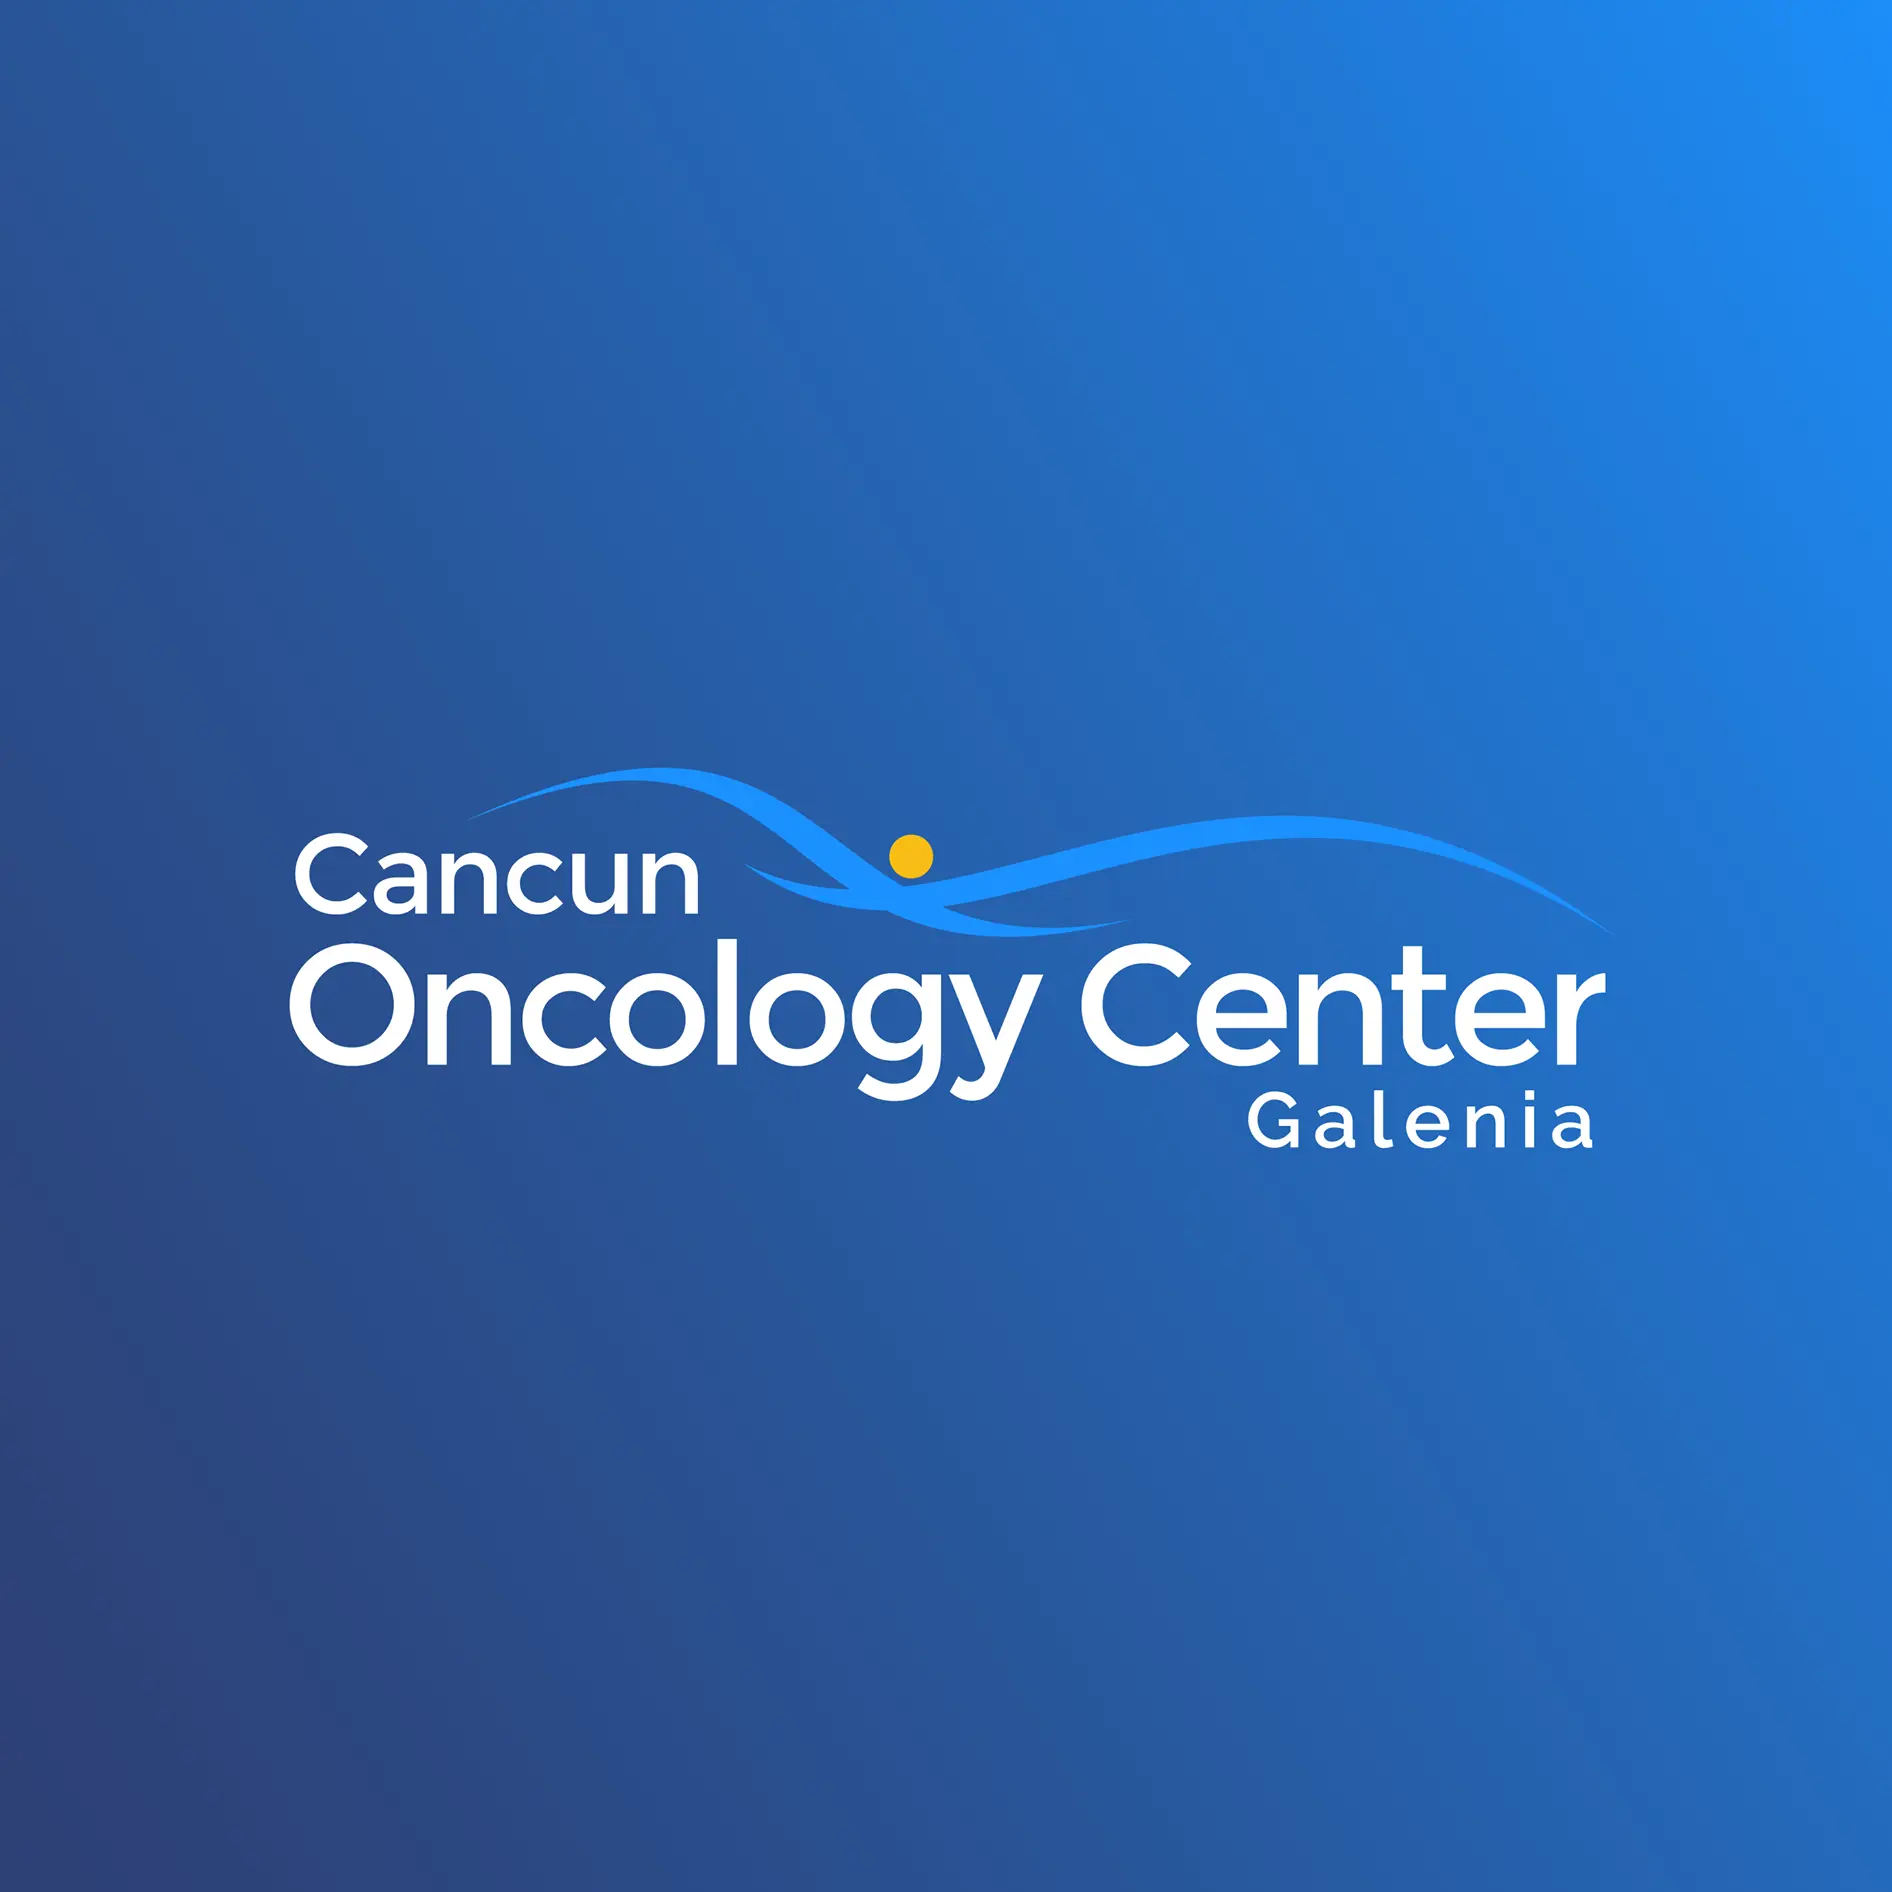 Cancun Oncology Center Galenia